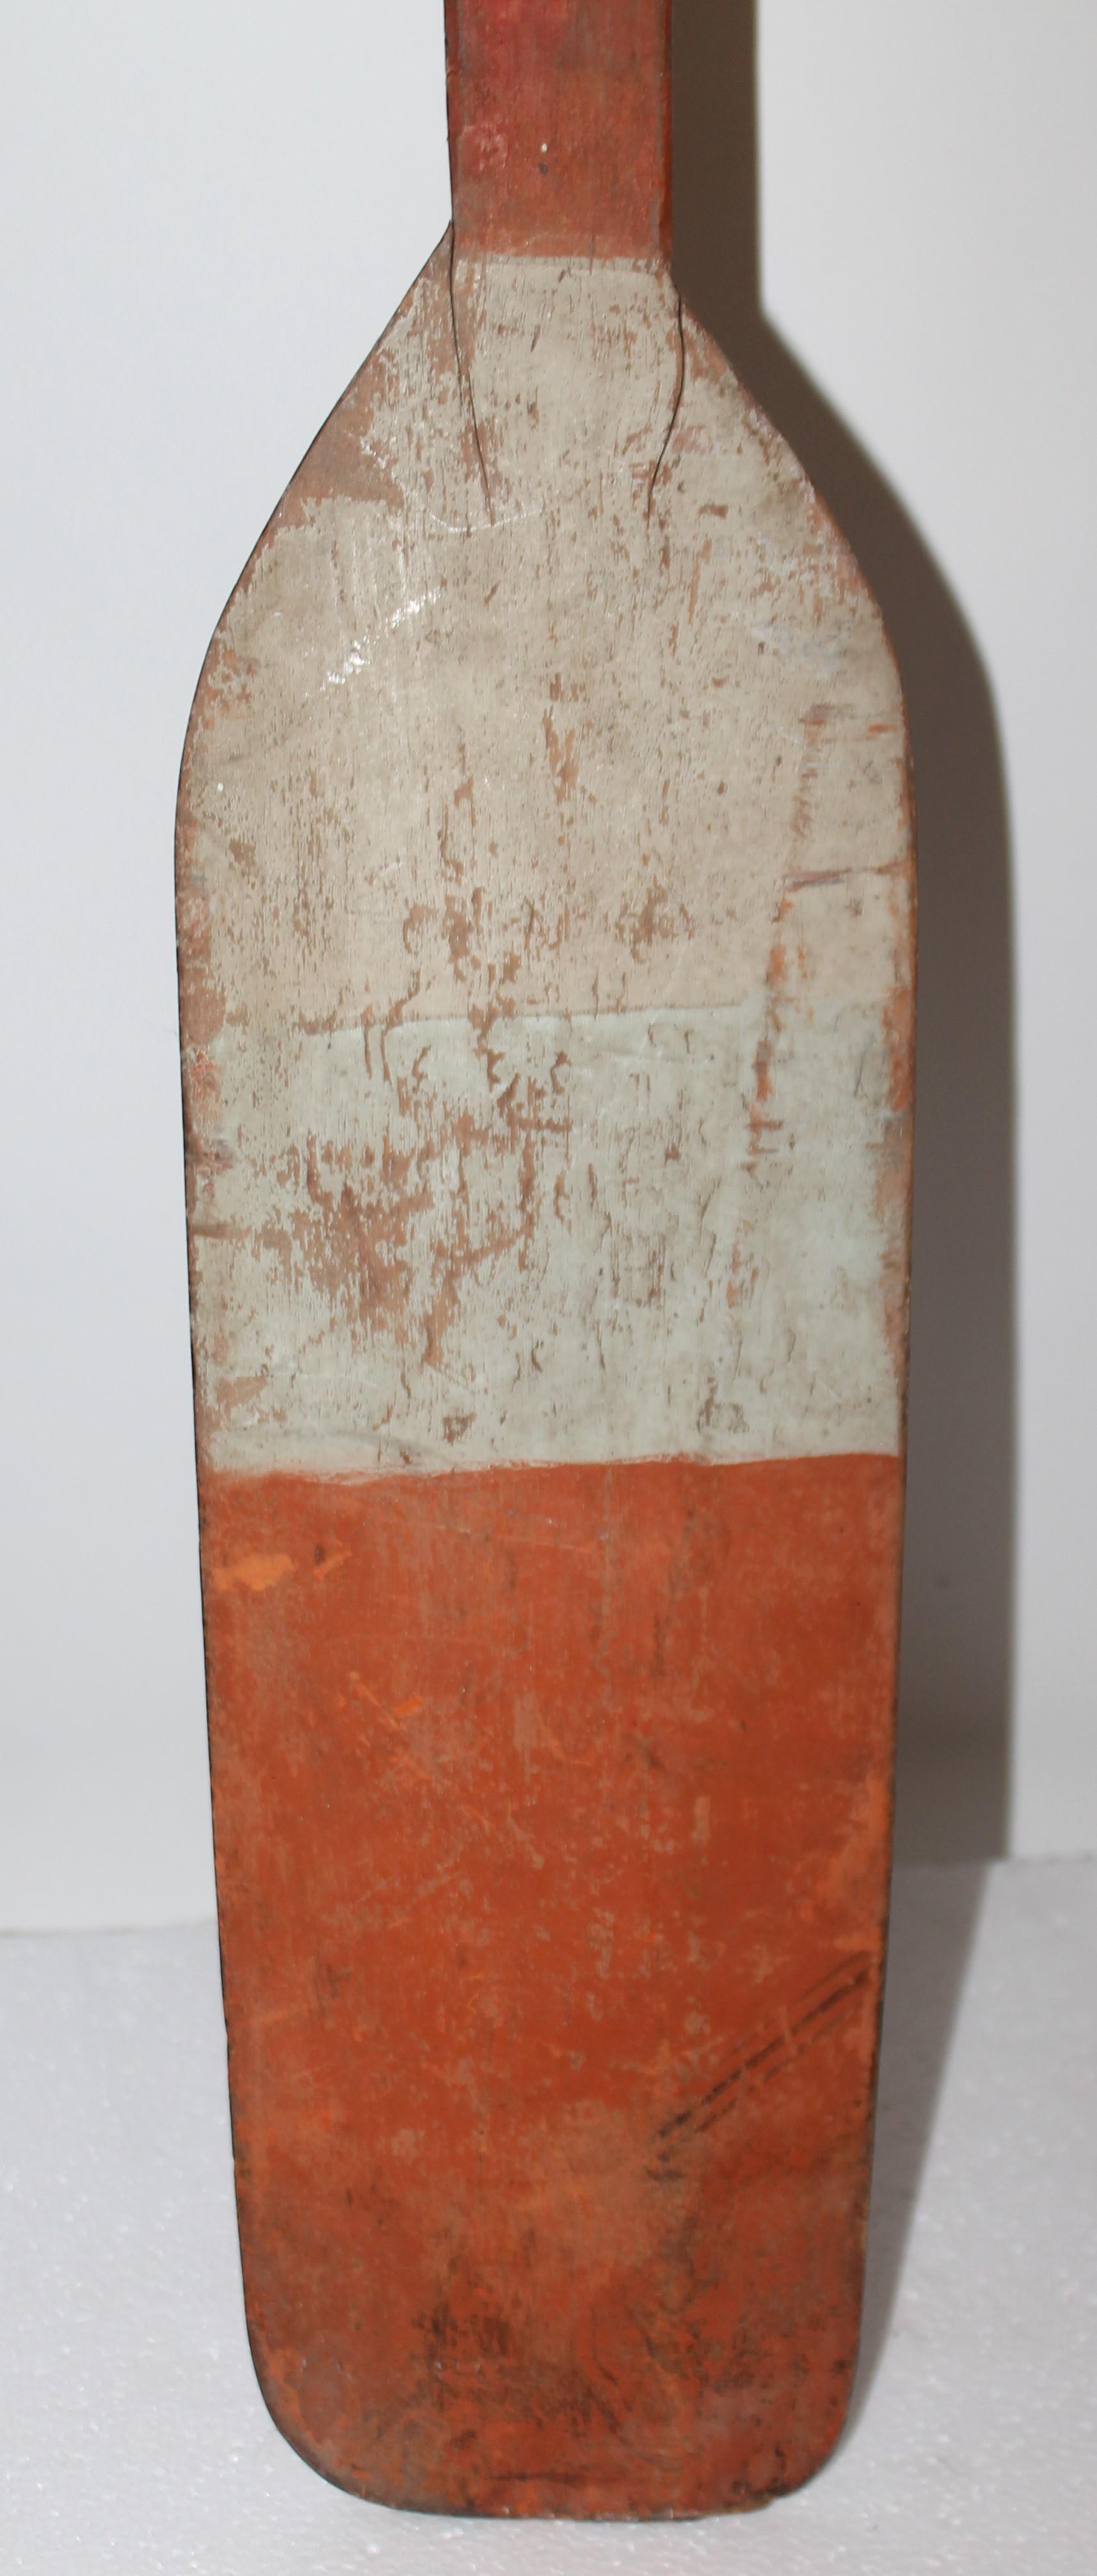 This cool 19thc orange & white painted paddle in fine condition.Great on the wall in a beach house or cottage.